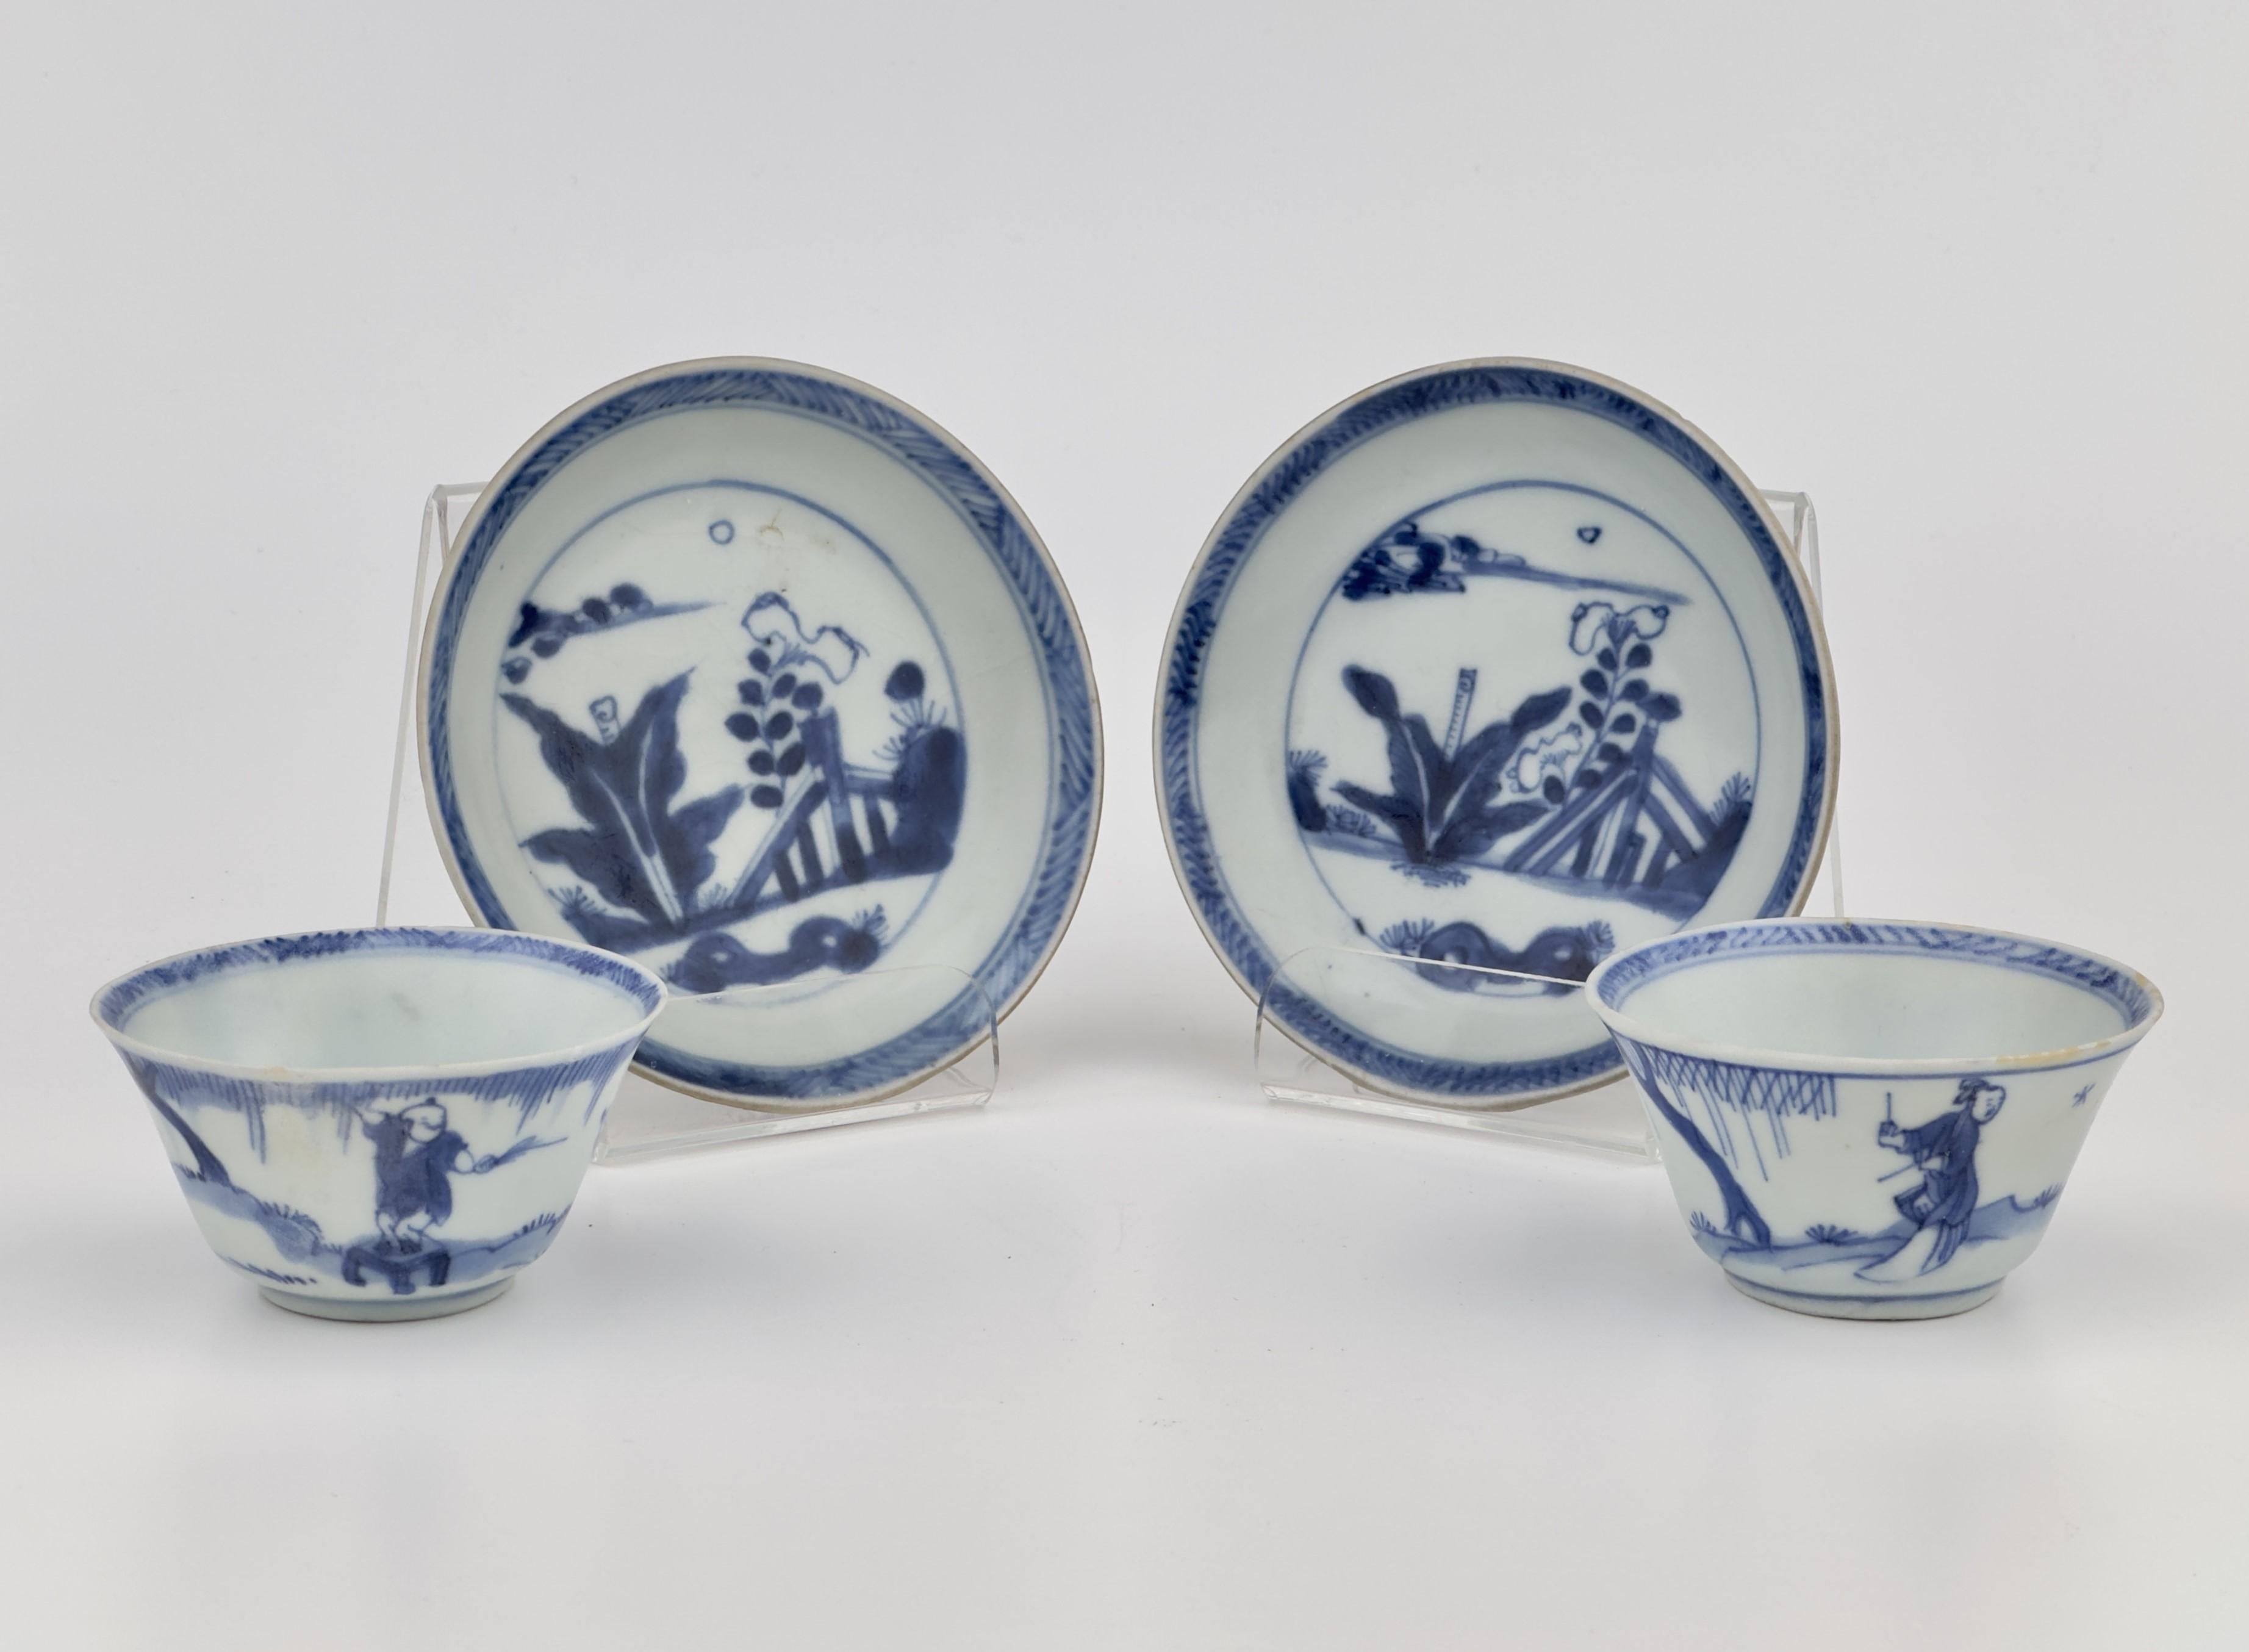 The saucer set depicts botanical garden, motifs rich in symbolism within east asian culture. Each teabowl depicts scenes, characters and situations are richly depicted inside the small cup.

Period : Qing Dynasty, Yongzheng Period
Production Date :